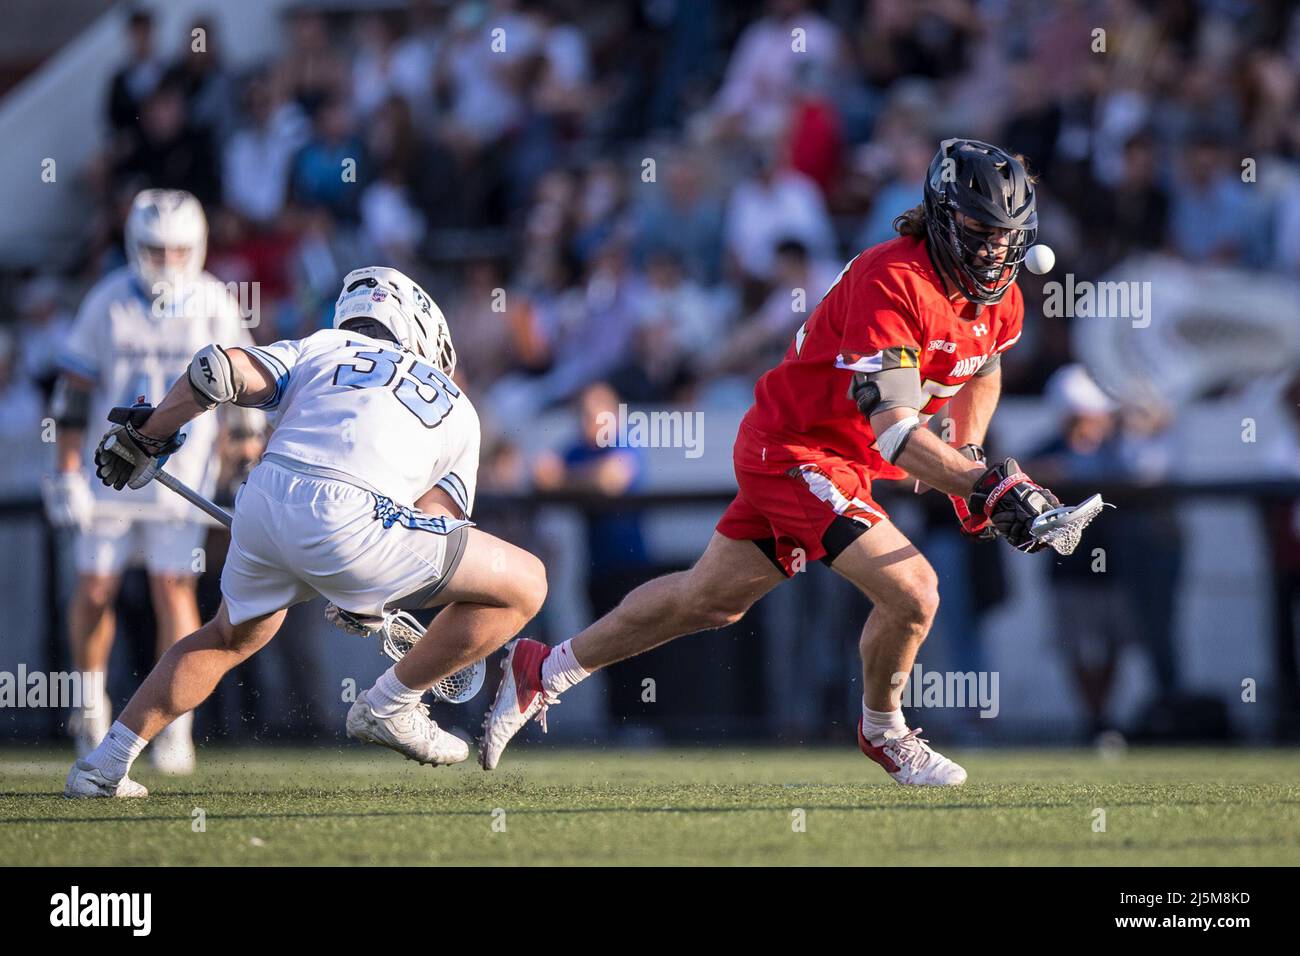 April 23, 2022: Maryland fo Luke Wierman (52) was dominant on faceoff battles throughout the game during the ncaa men's lacrosse regular season finale between the Maryland Terrapins and the Johns Hopkins Blue Jays at Homewood Field in Baltimore, Maryland Photographer: Cory Royster Stock Photo